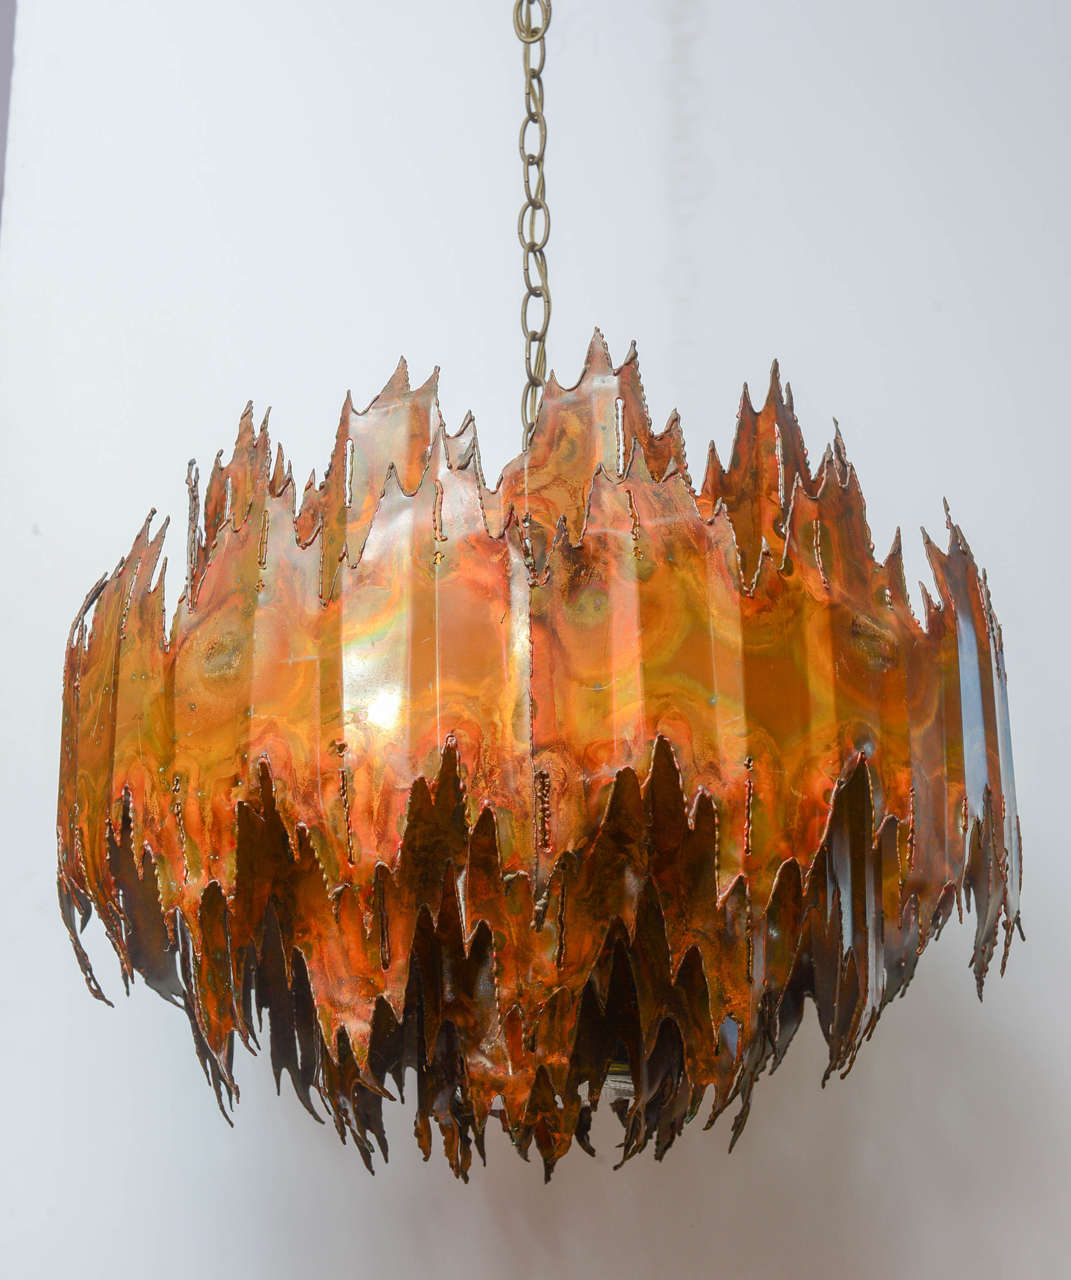 Abstract brutalist copper chandelier with 7 sockets.